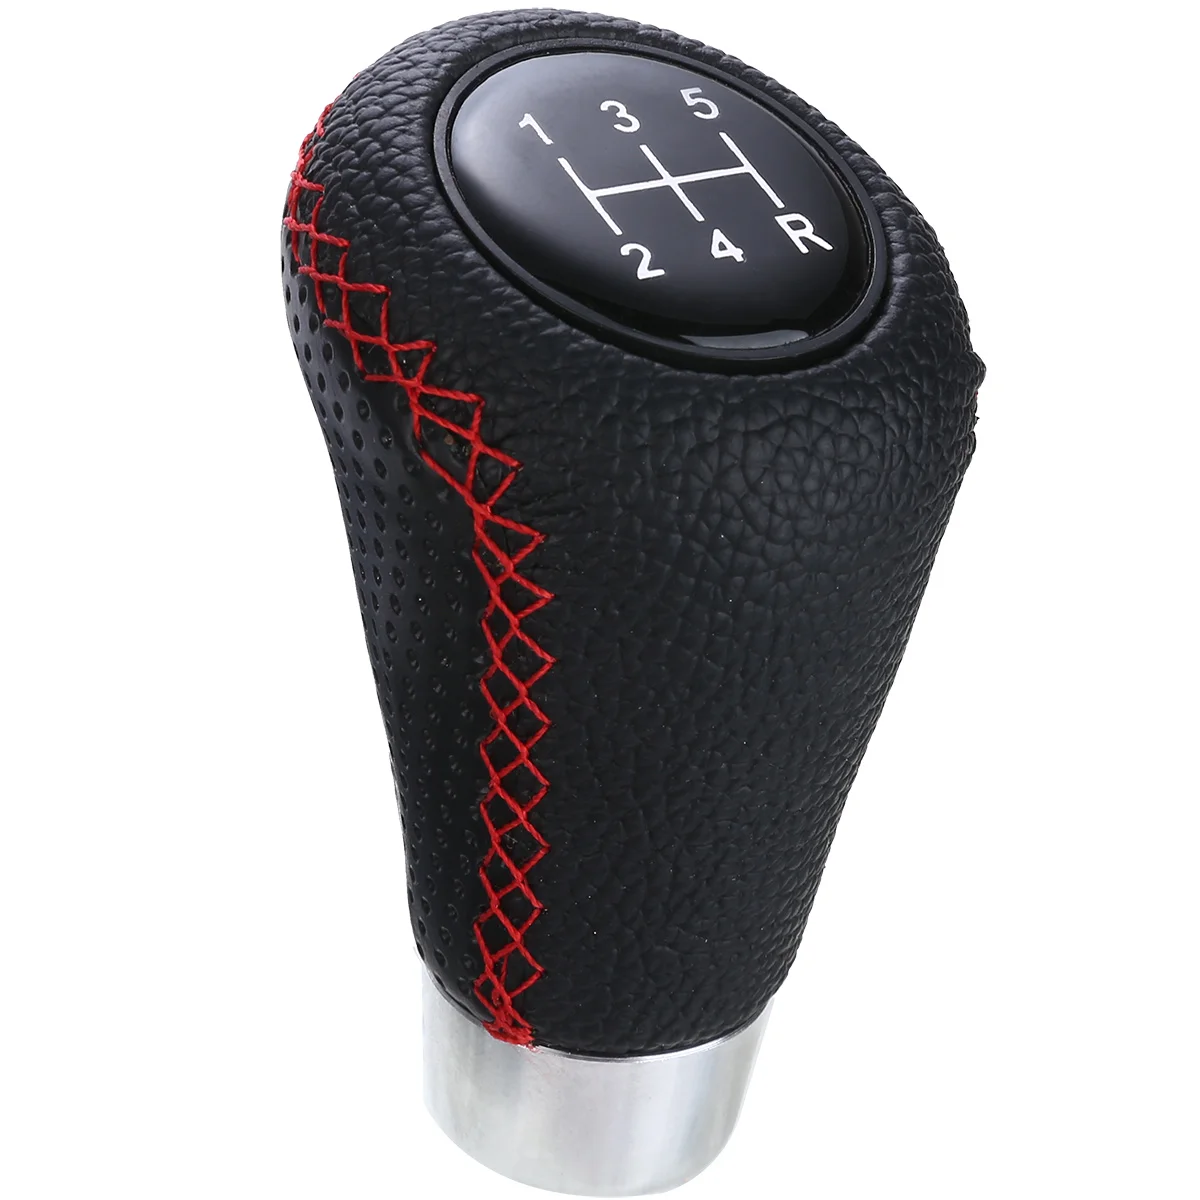 Universal Speed Leather Car Manual Gear Shifter Shift Lever Knob Cover Decor YW 